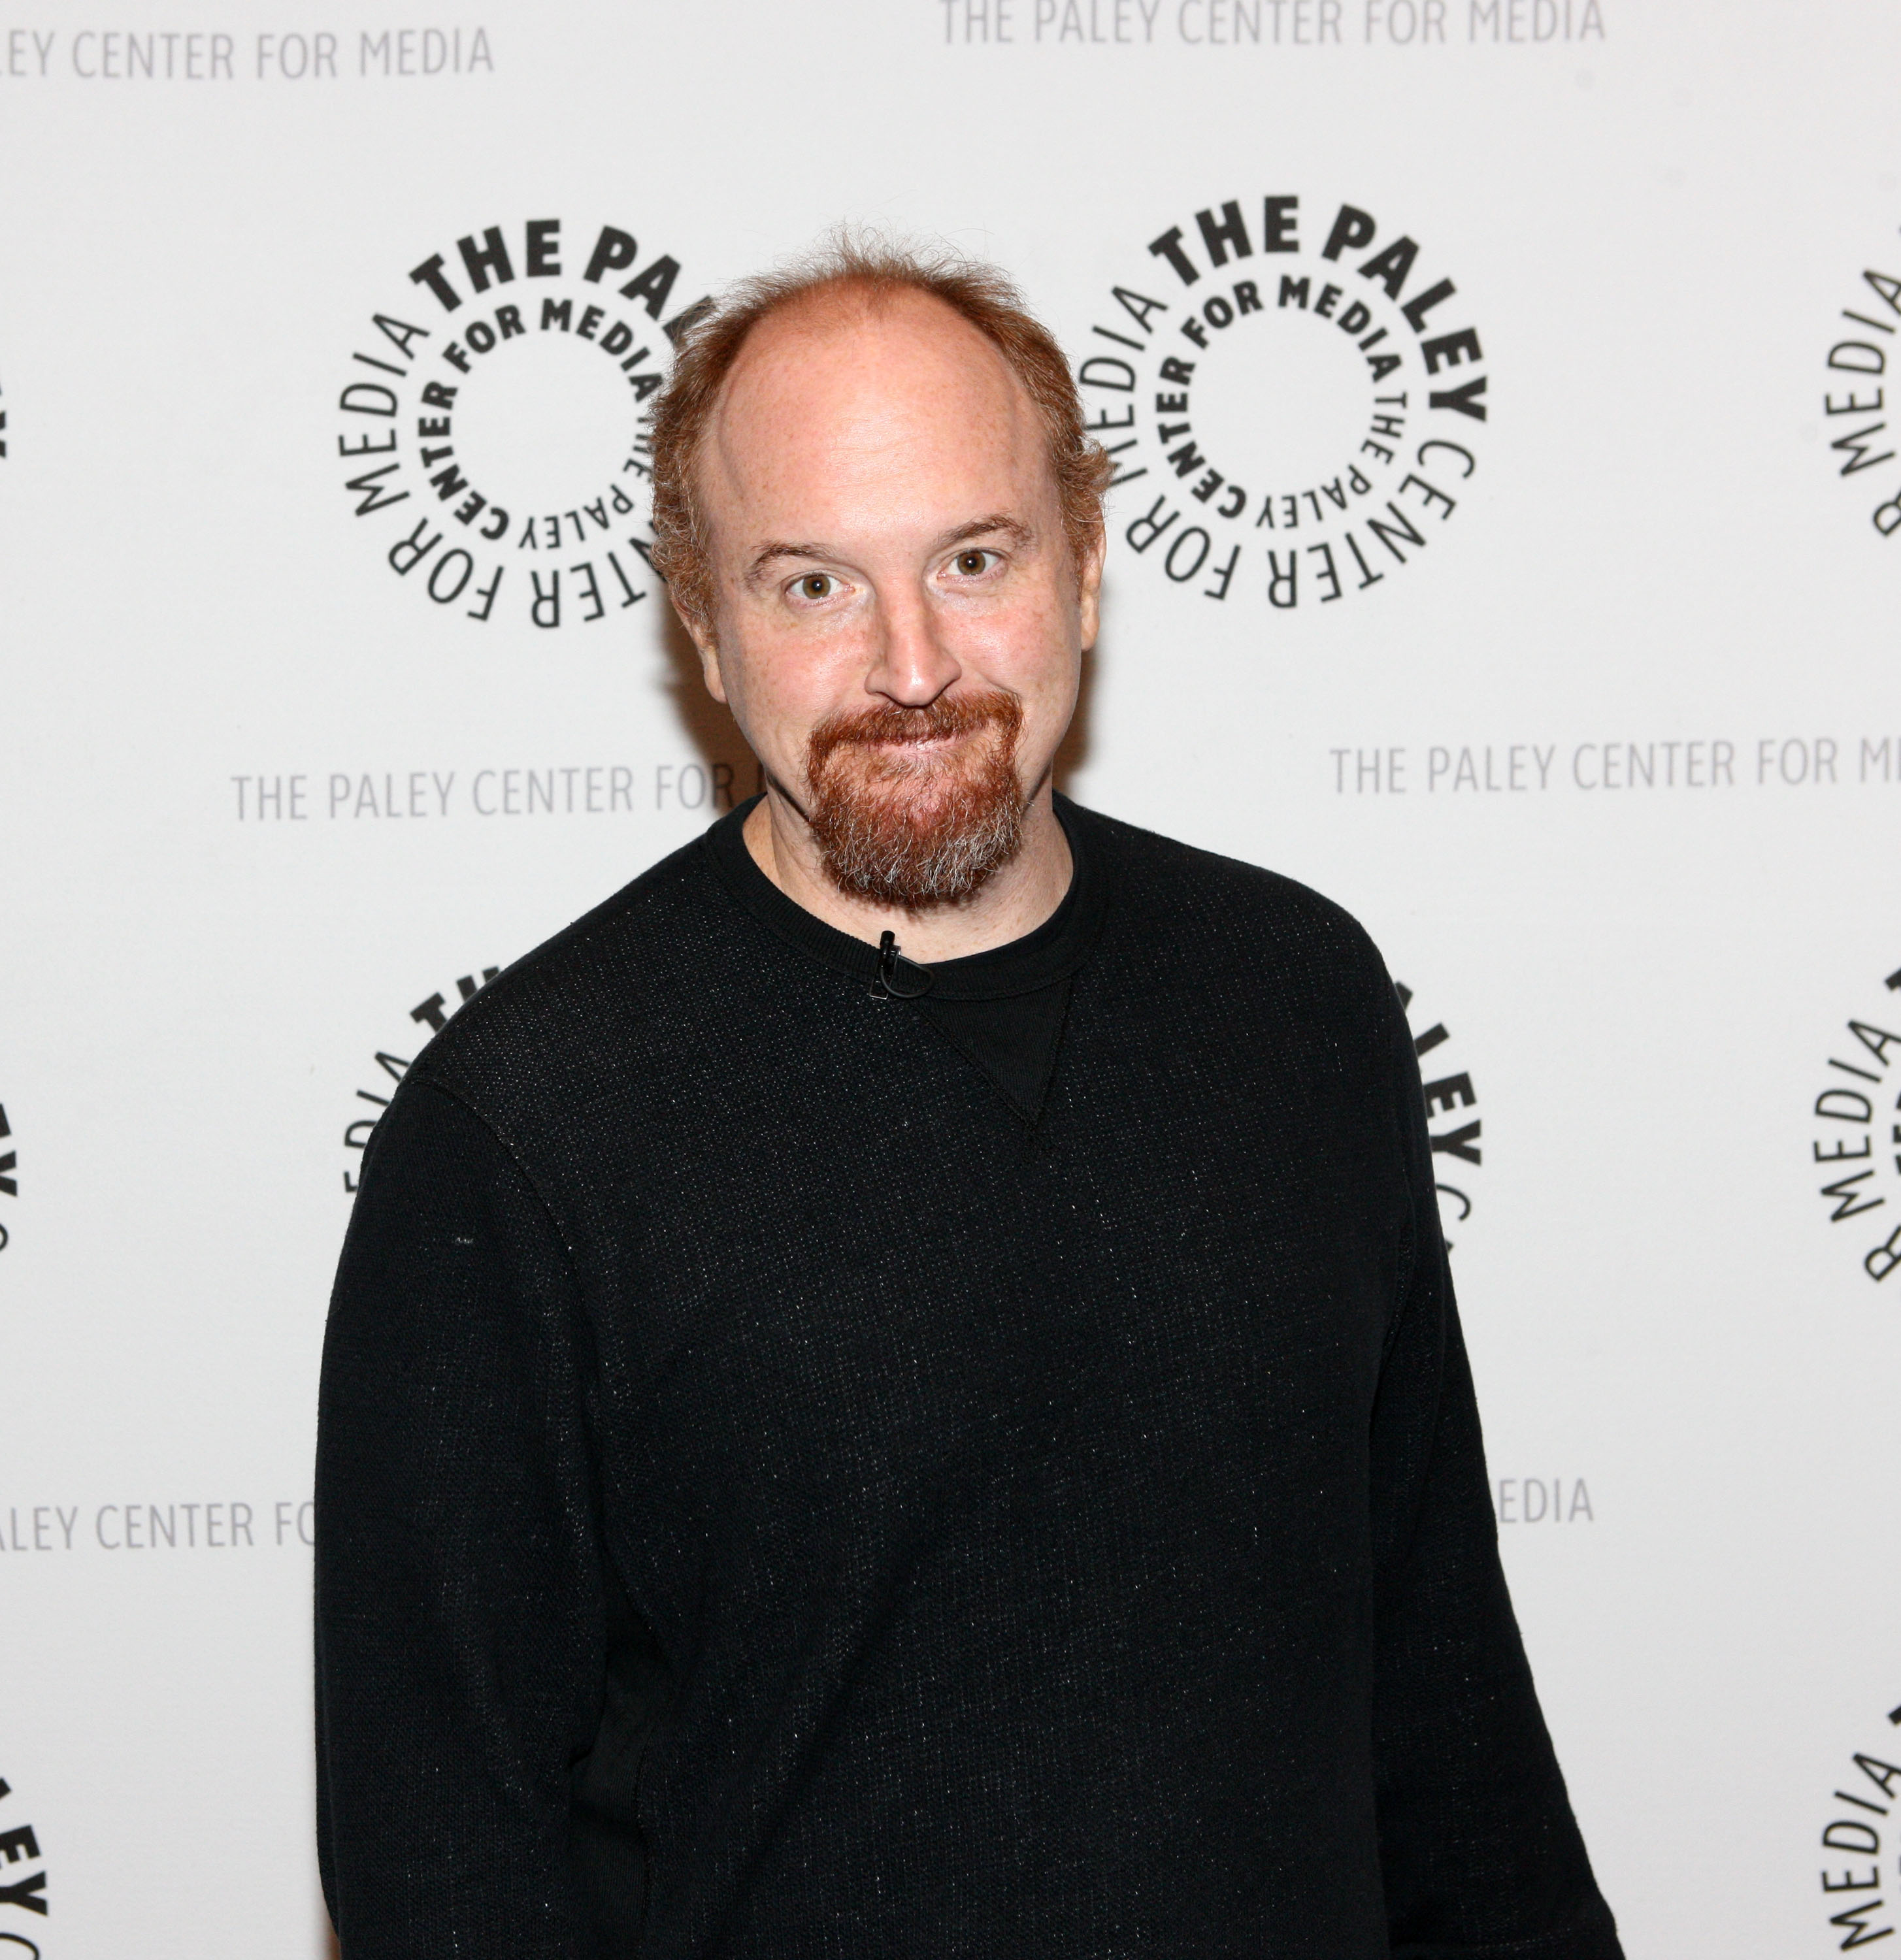 Louis C.K. visits The Paley Center for Media on November 3, 2010, in New York City. | Source: Getty Images